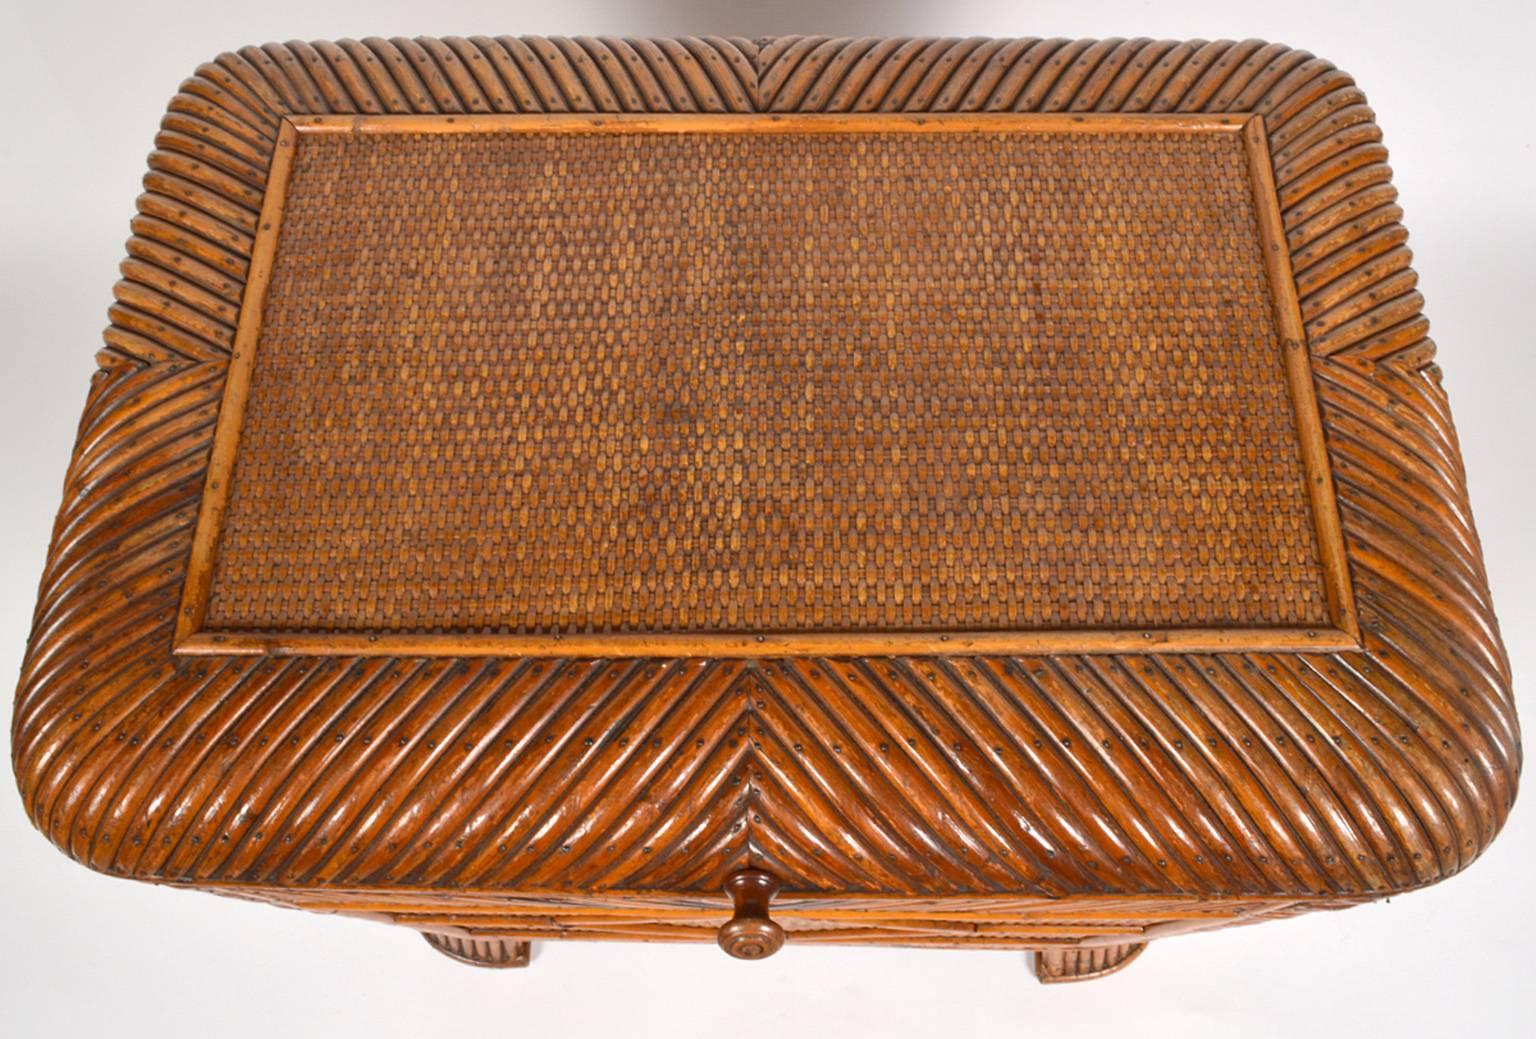 Anglo-Indian 19th Century English Patterned Bamboo and Raffia Weave Covered Storage Box